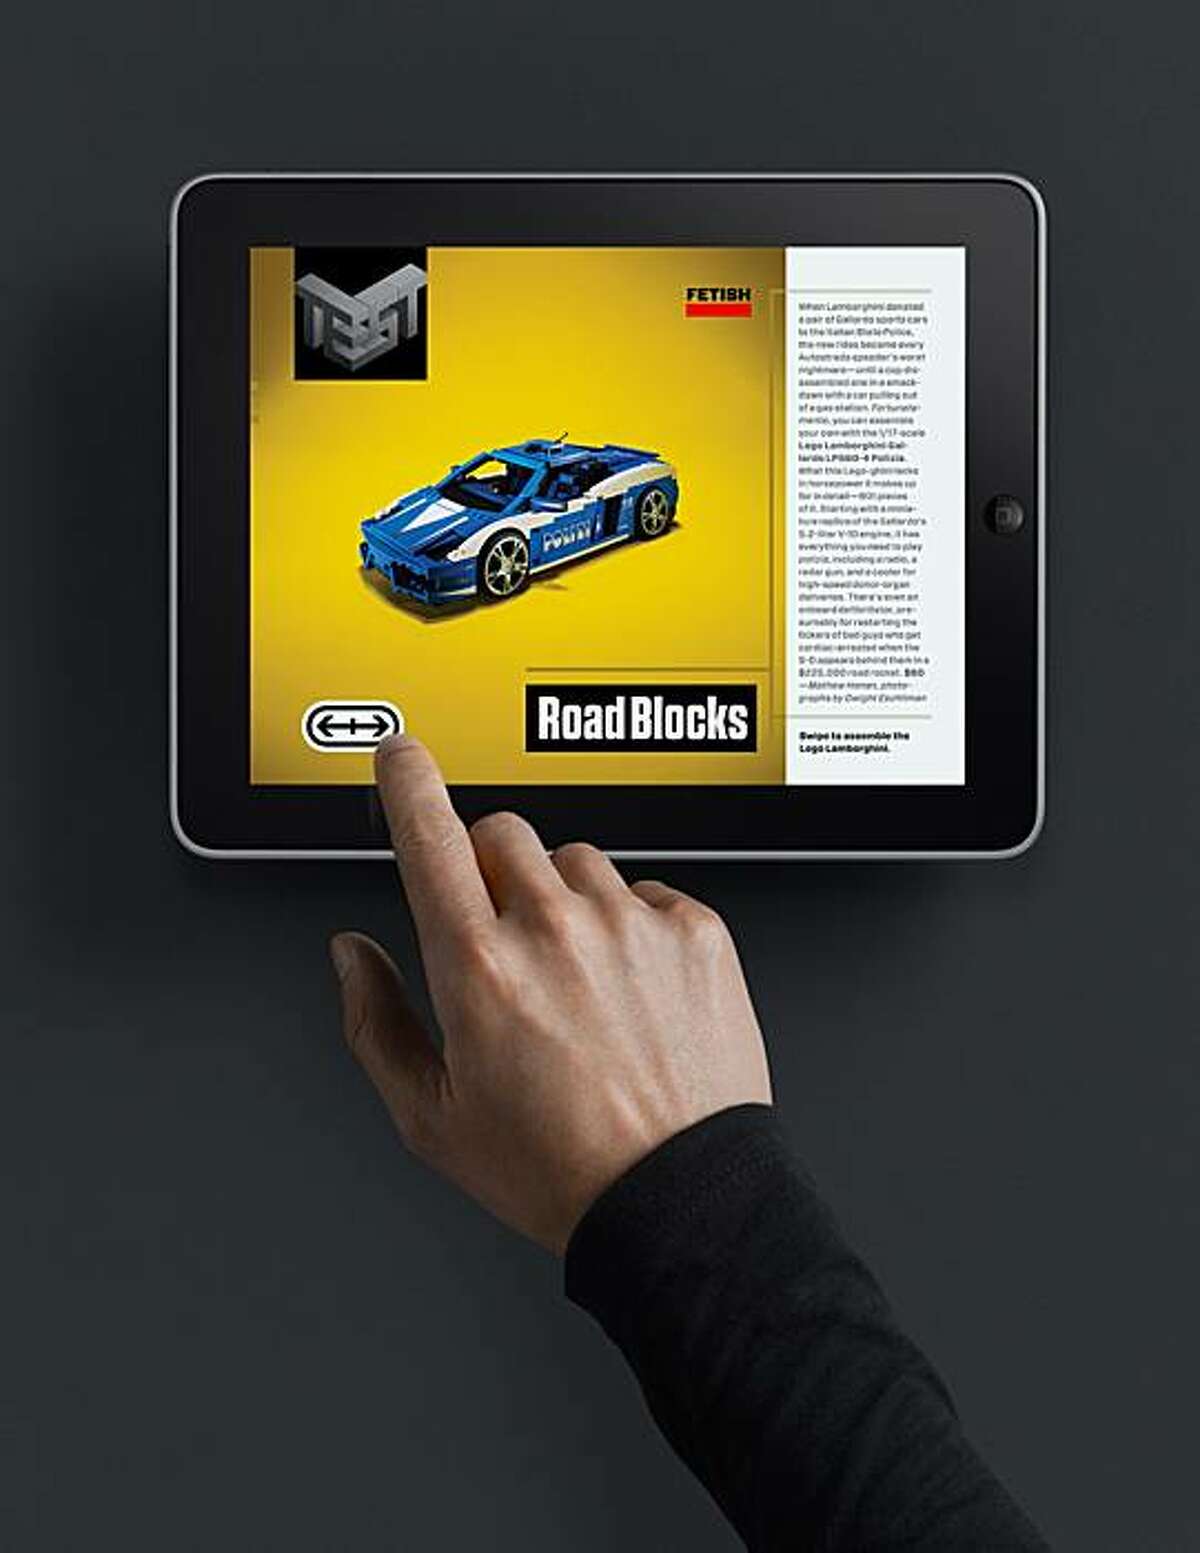 In this undated photo provided by Wired, a person demonstrates the use of an Apple iPad. After nearly a year of laboring on a tablet computer edition of the magazine, Wired released its application in Apple's digital newsstand Wednesday, May 26, 2010. Other titles from Conde Nast, including Vanity Fair and GQ, had already come out for the iPad, which launched April 3. But Wired is the first to undergo a top-to-bottom re-imagining for the new format.